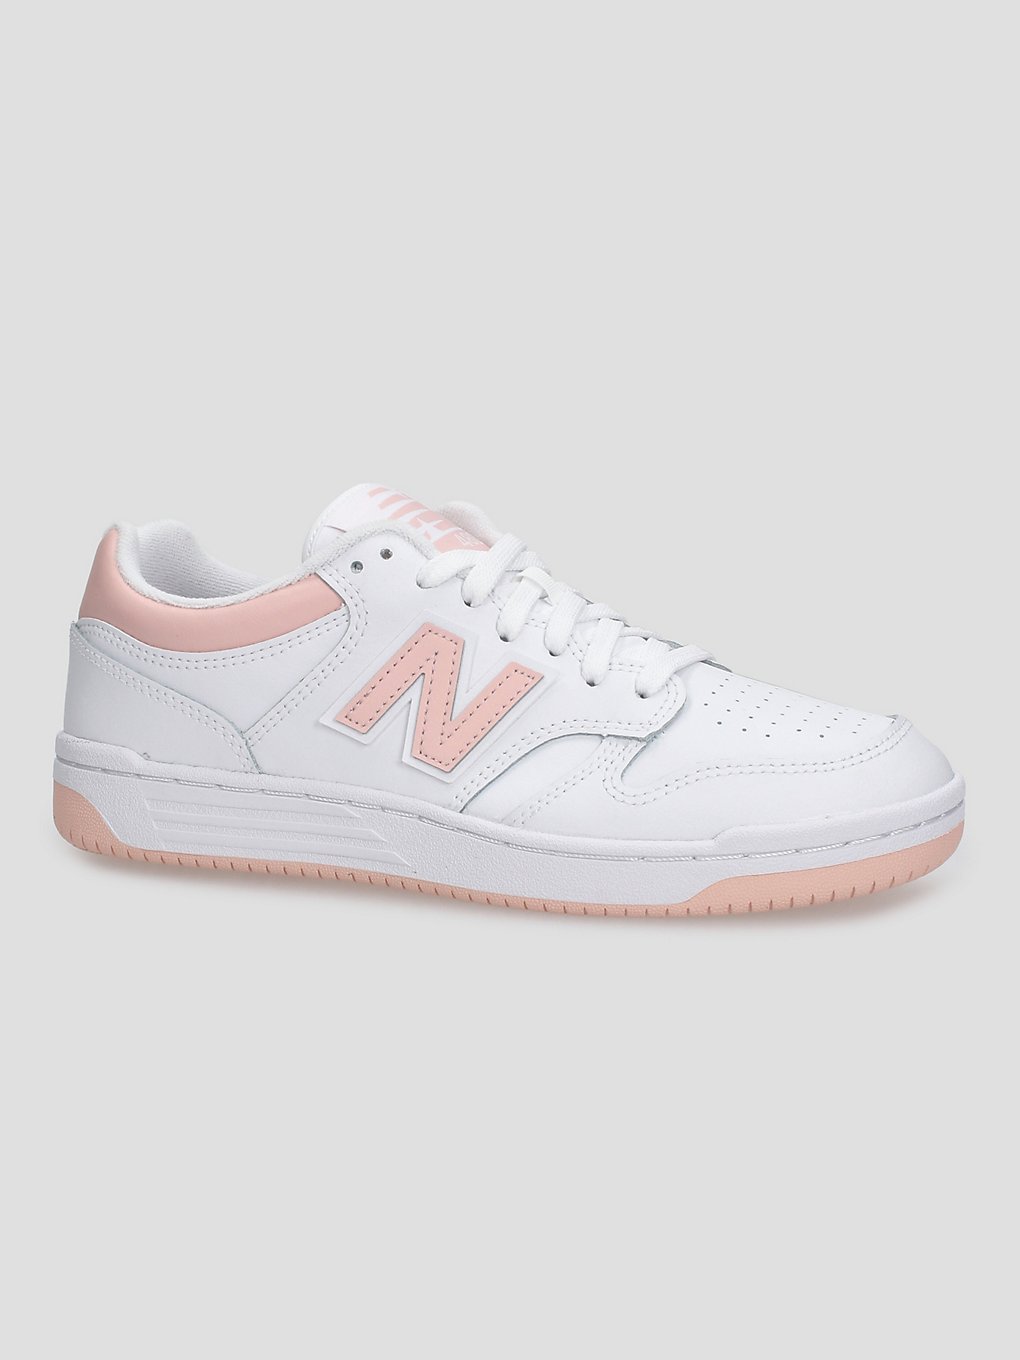 New Balance 480 Sneakers patroon